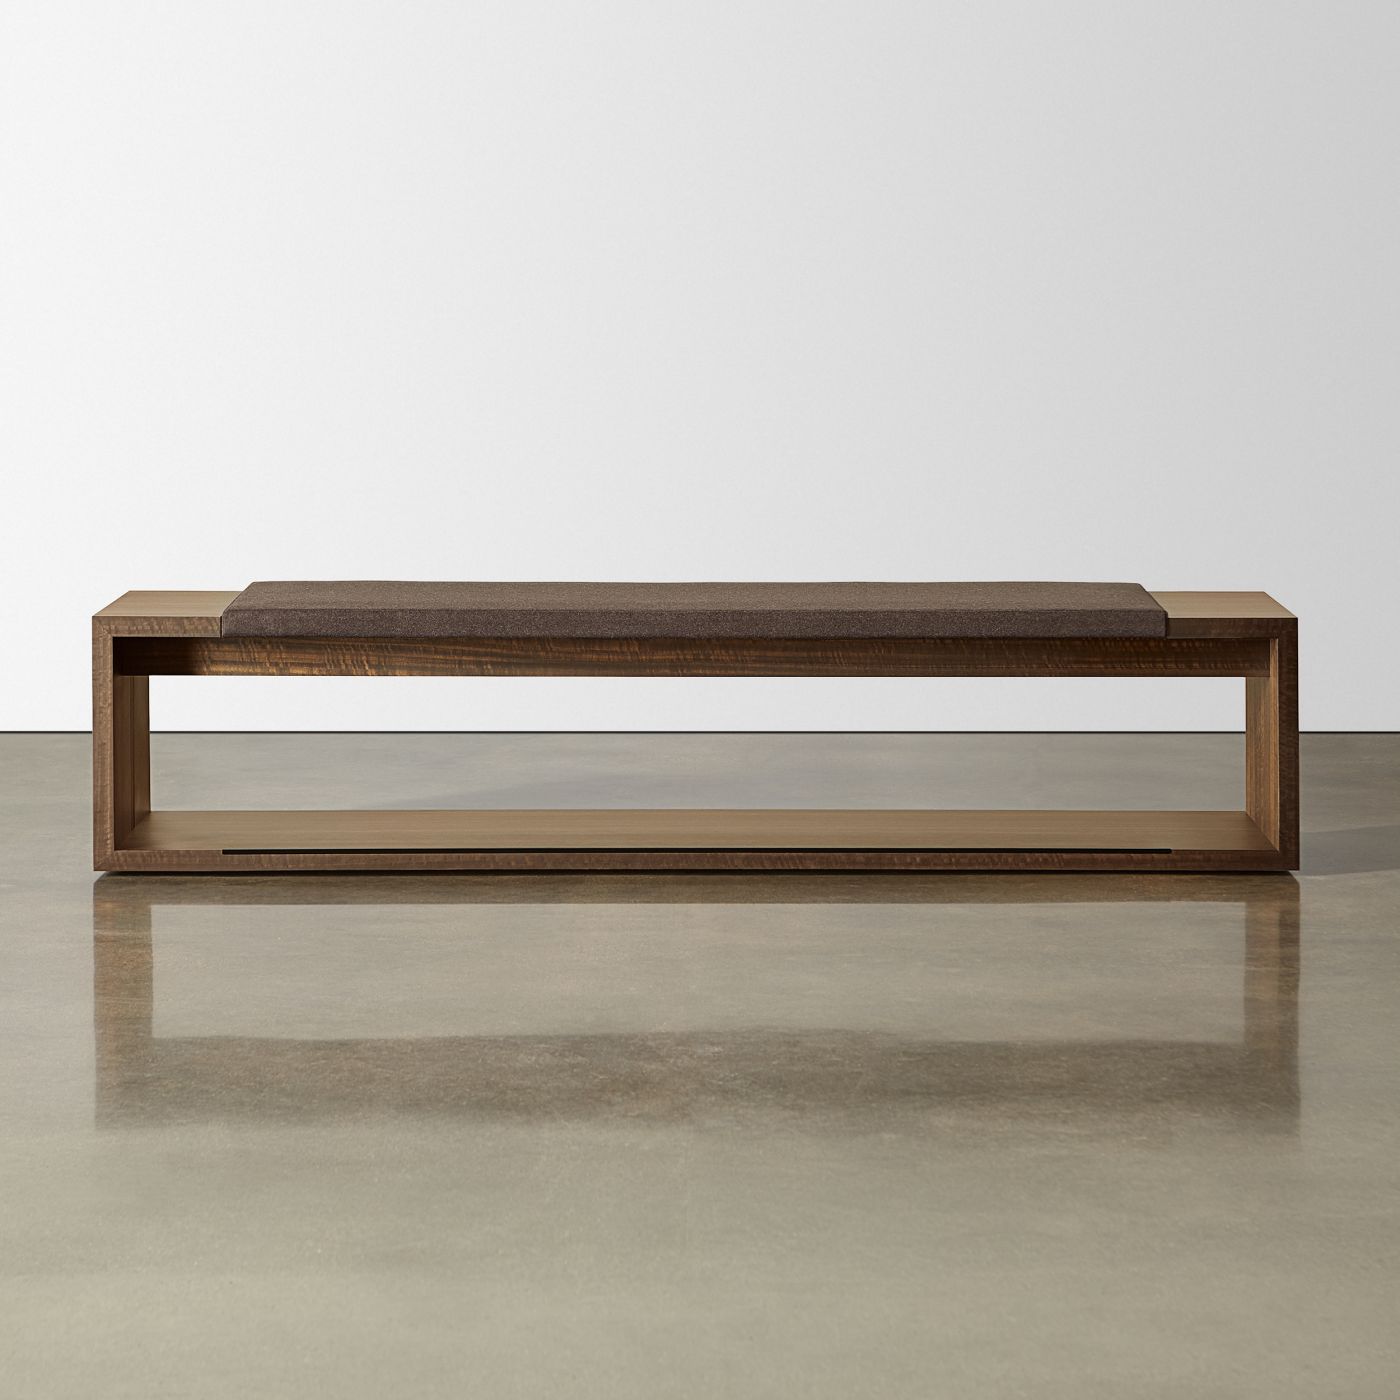 Each bench includes a gracious seating cushion and convenient end table surfaces.